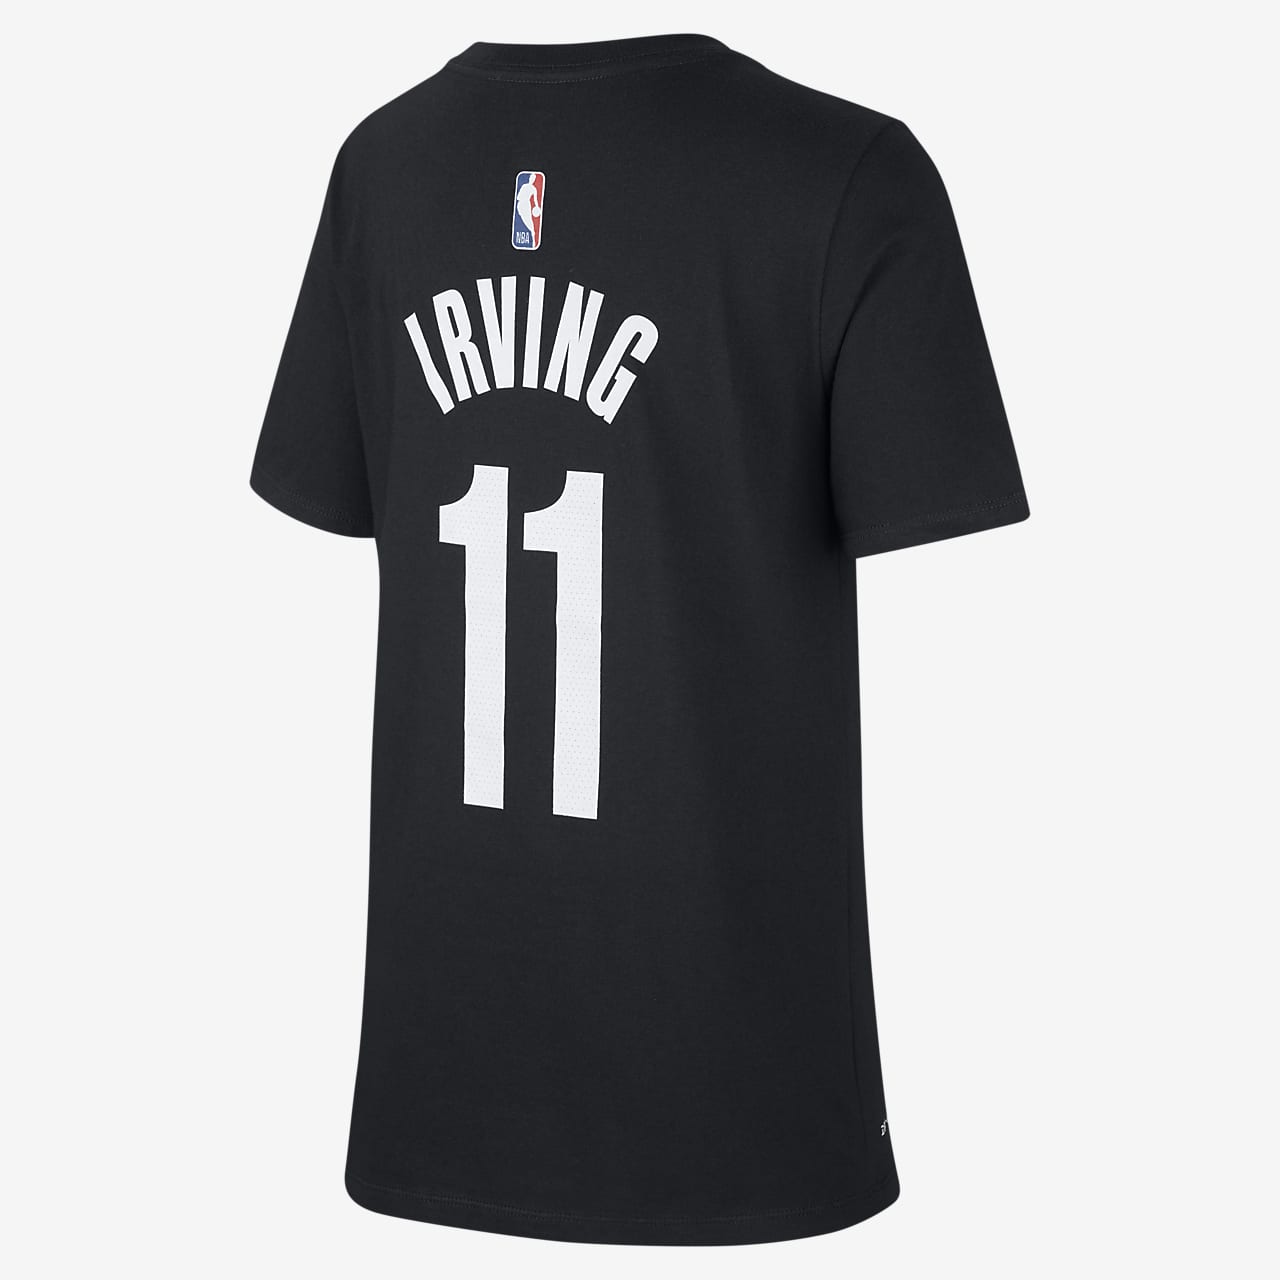 kyrie irving tee shirts